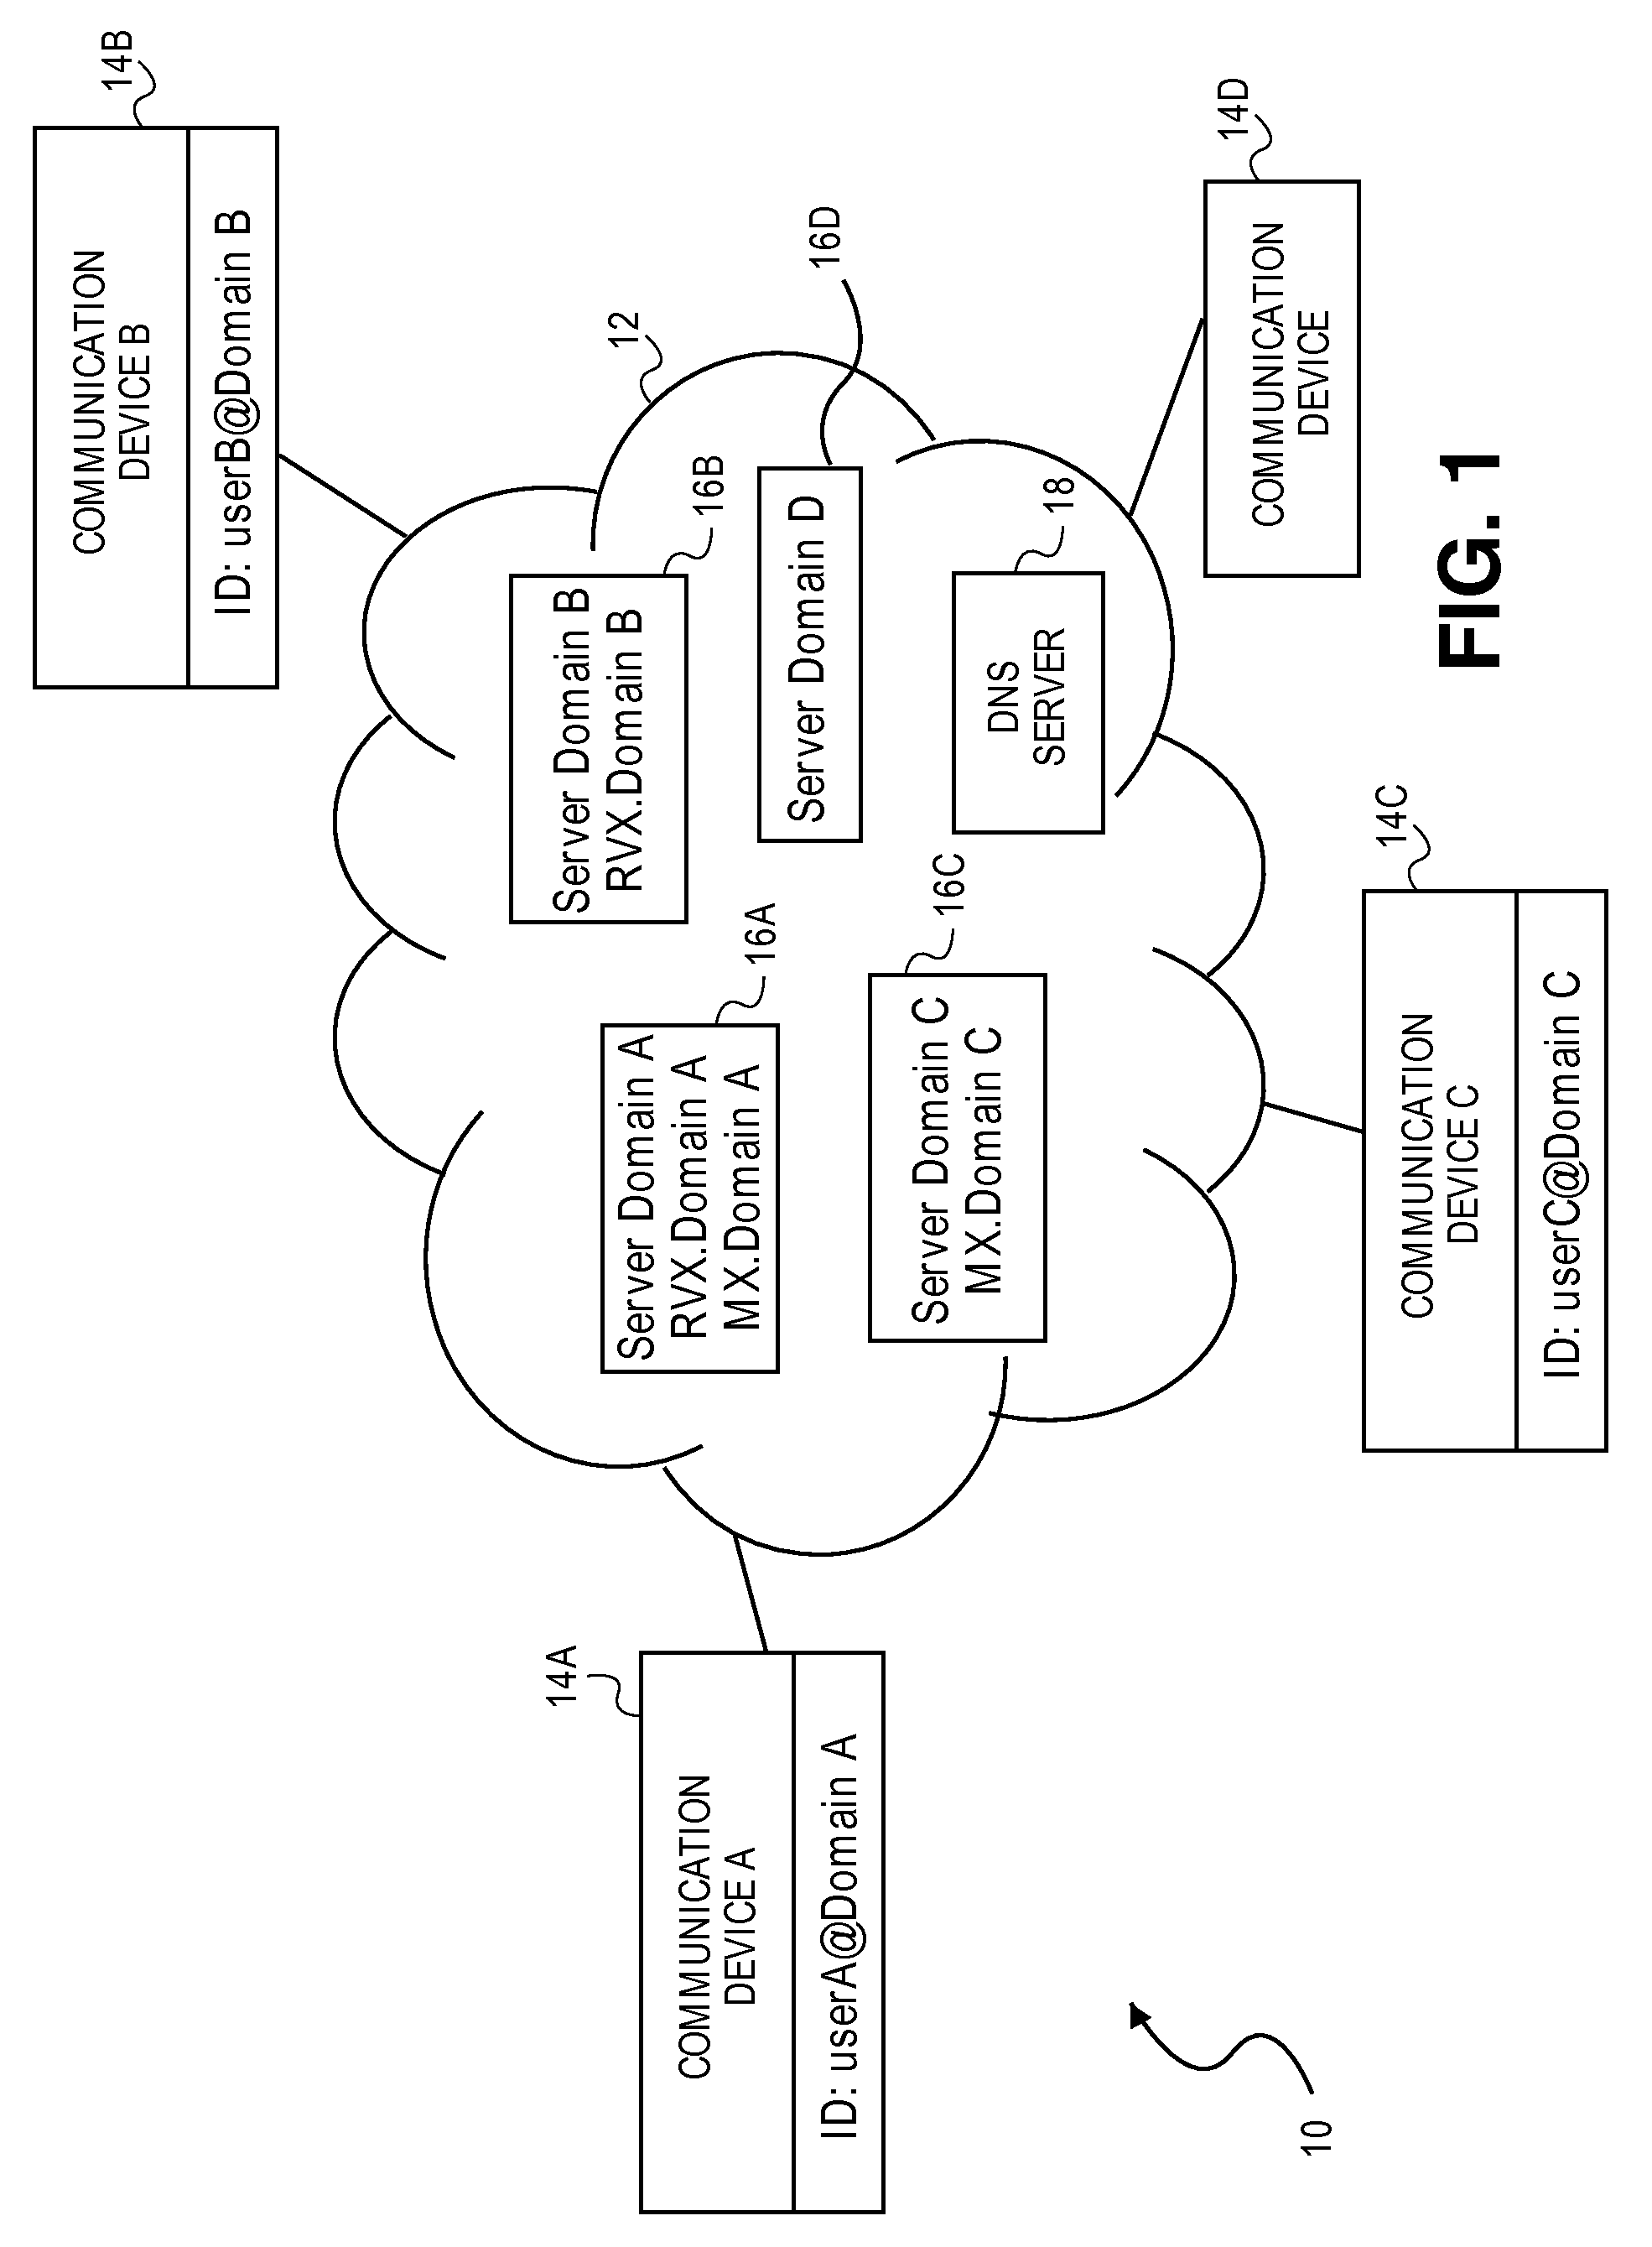 Real-time messaging method and apparatus